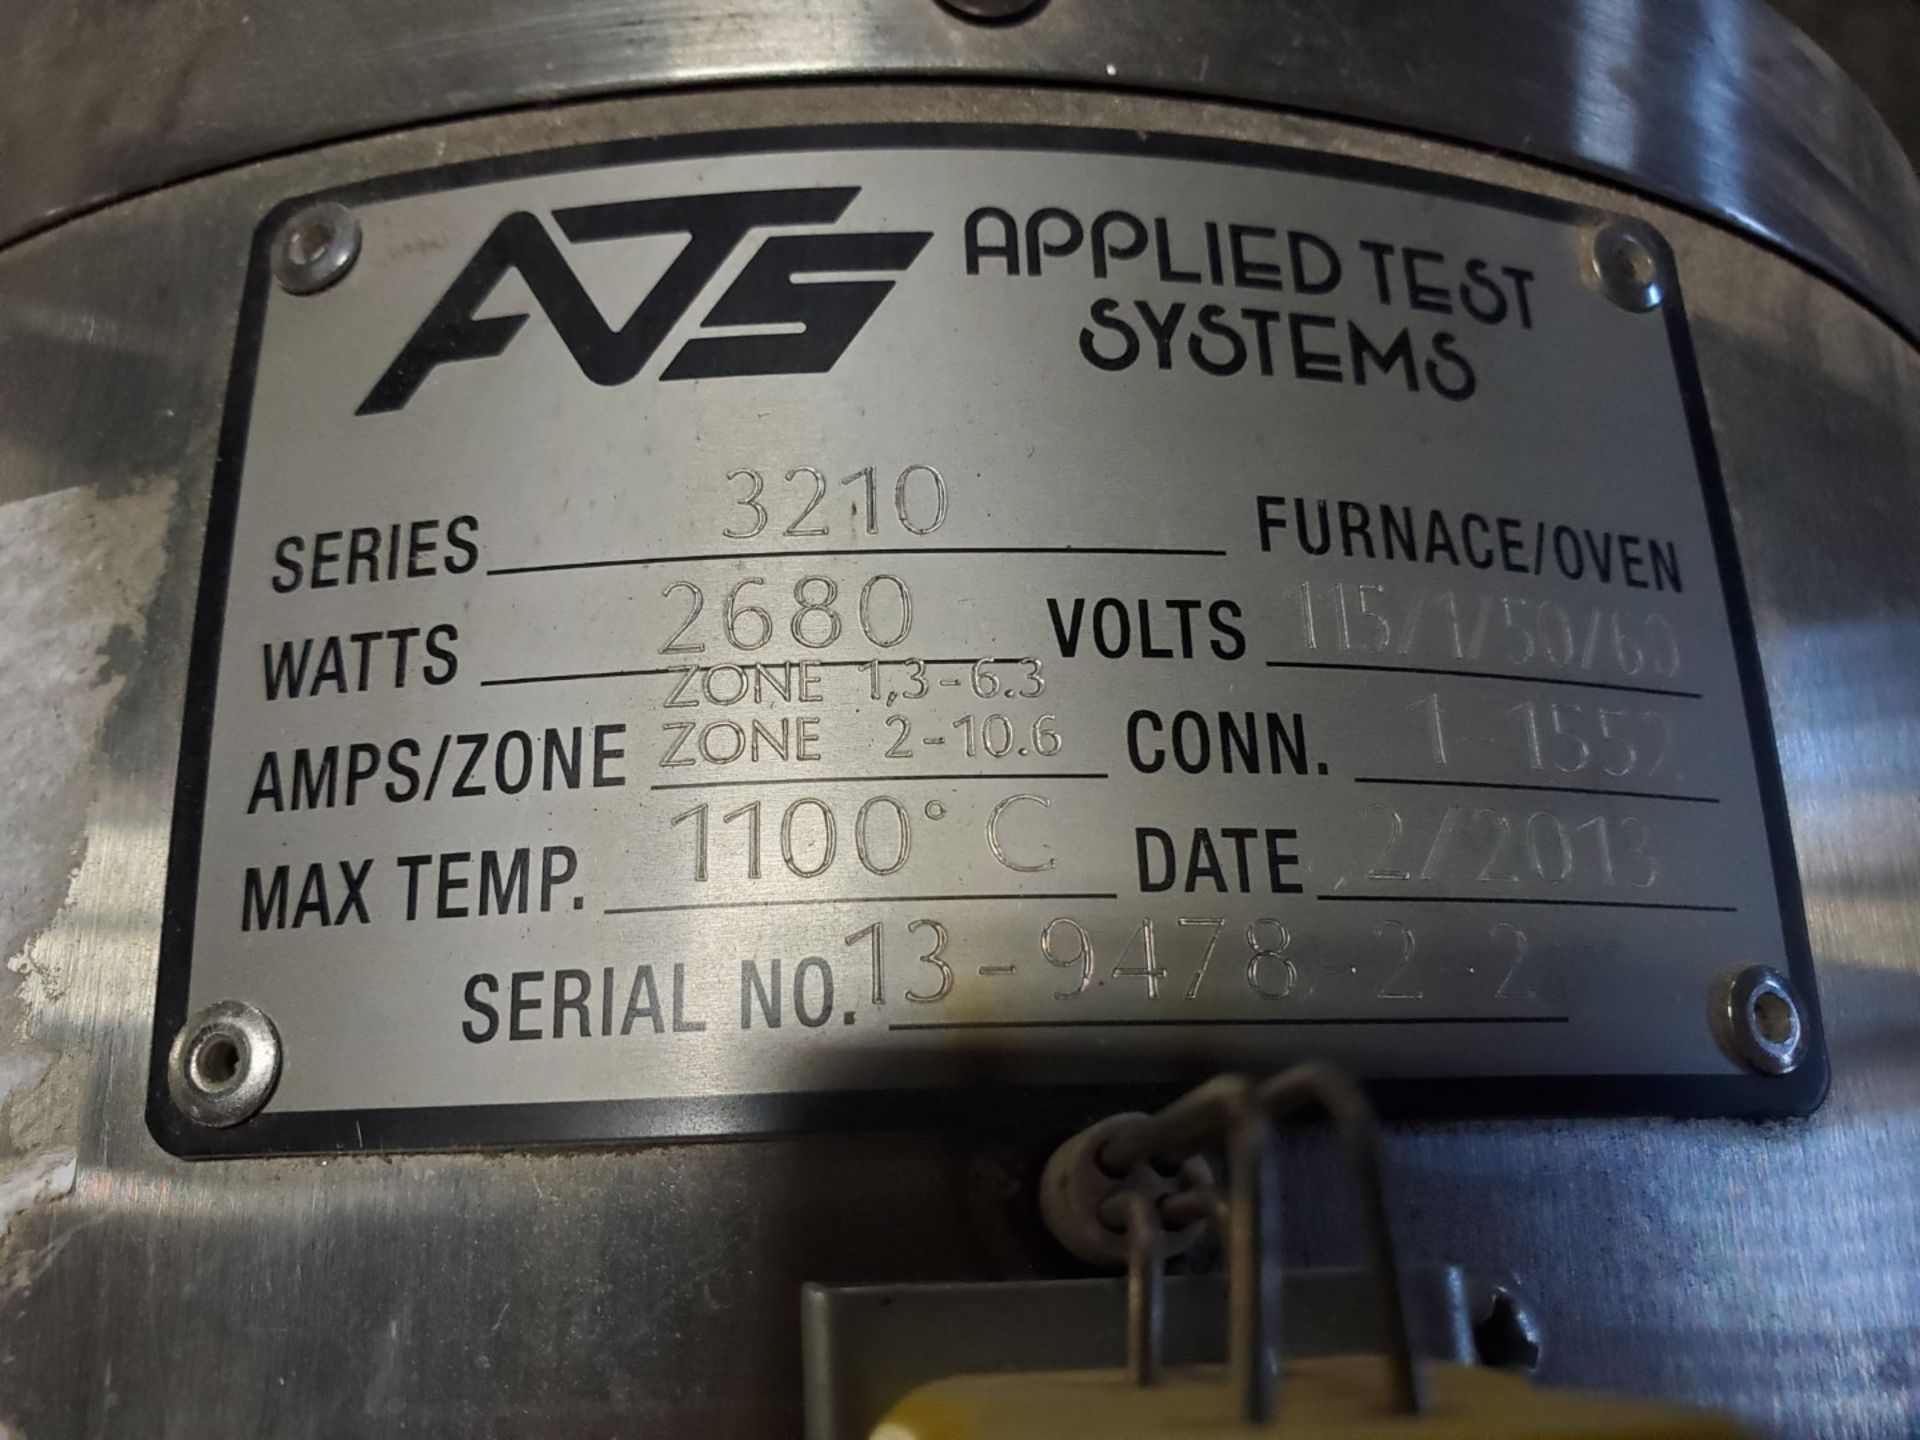 Applied Test Systems (ATS) Furnace, Series: 3210, Watts: 2680; Max temp: 1100C - Image 5 of 5